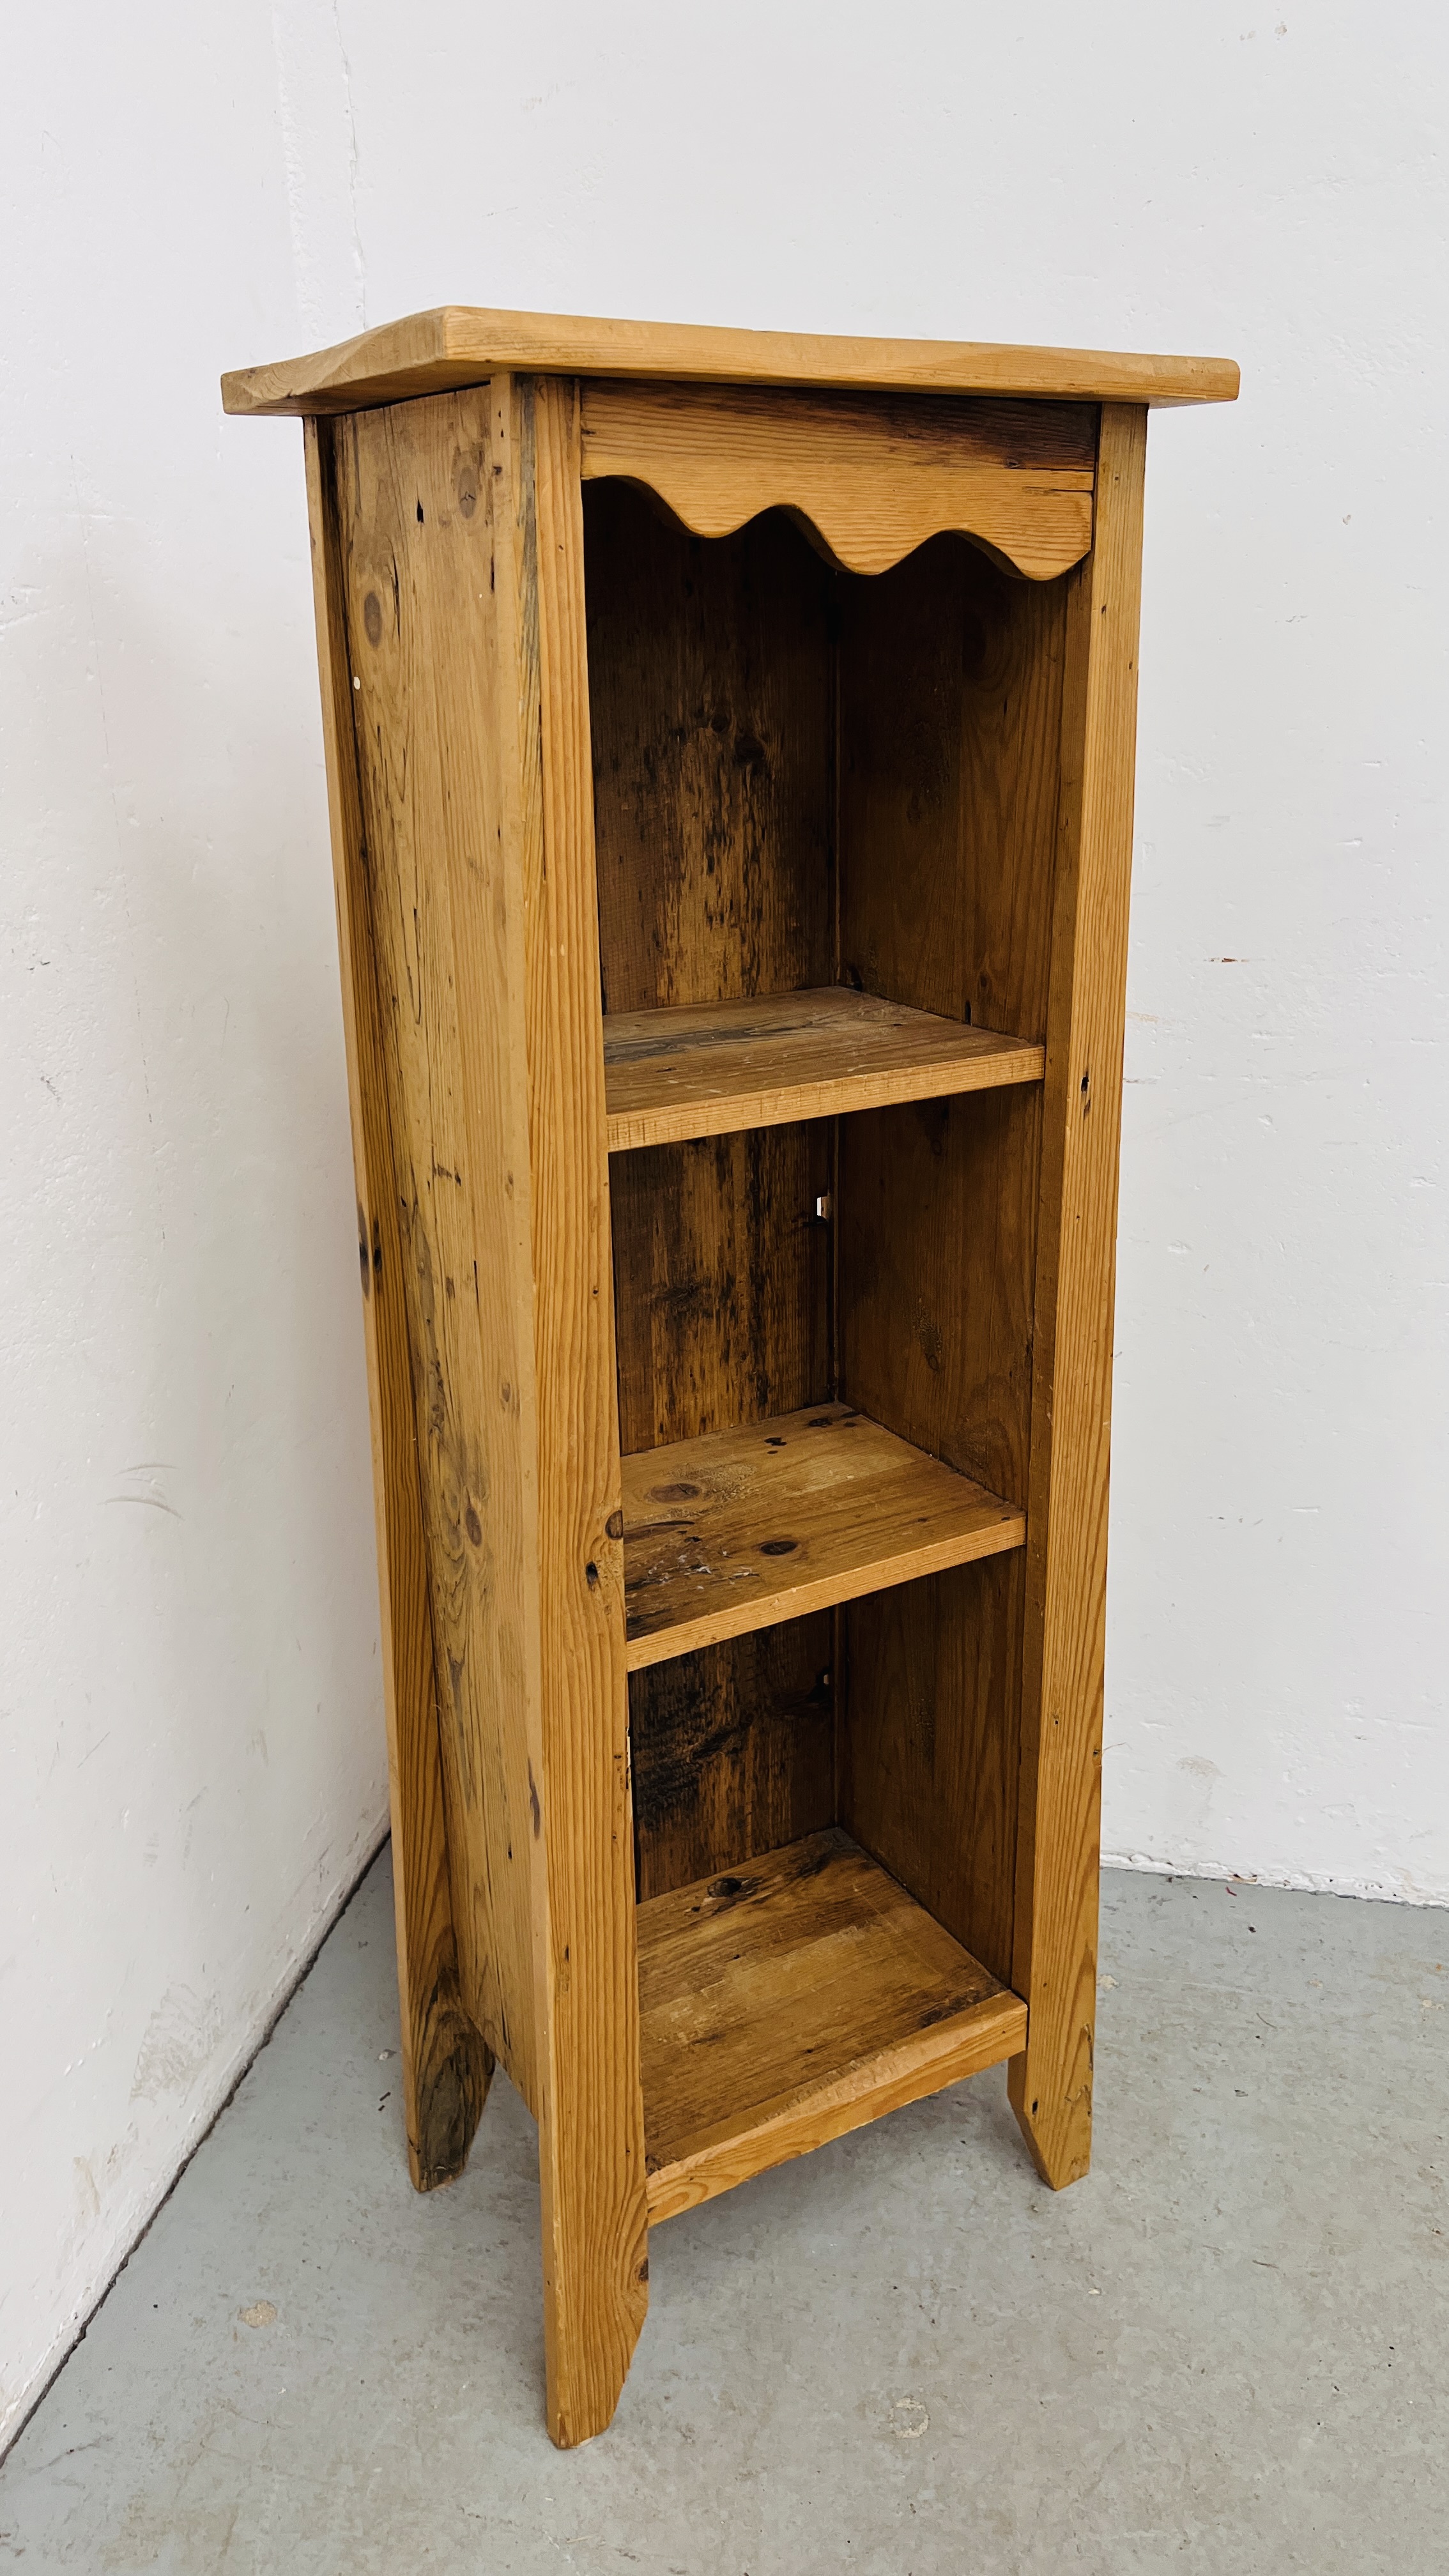 A 3 TIER RUSTIC PINE STAND H 123CM X D 29.5CM X W 44CM. - Image 2 of 7